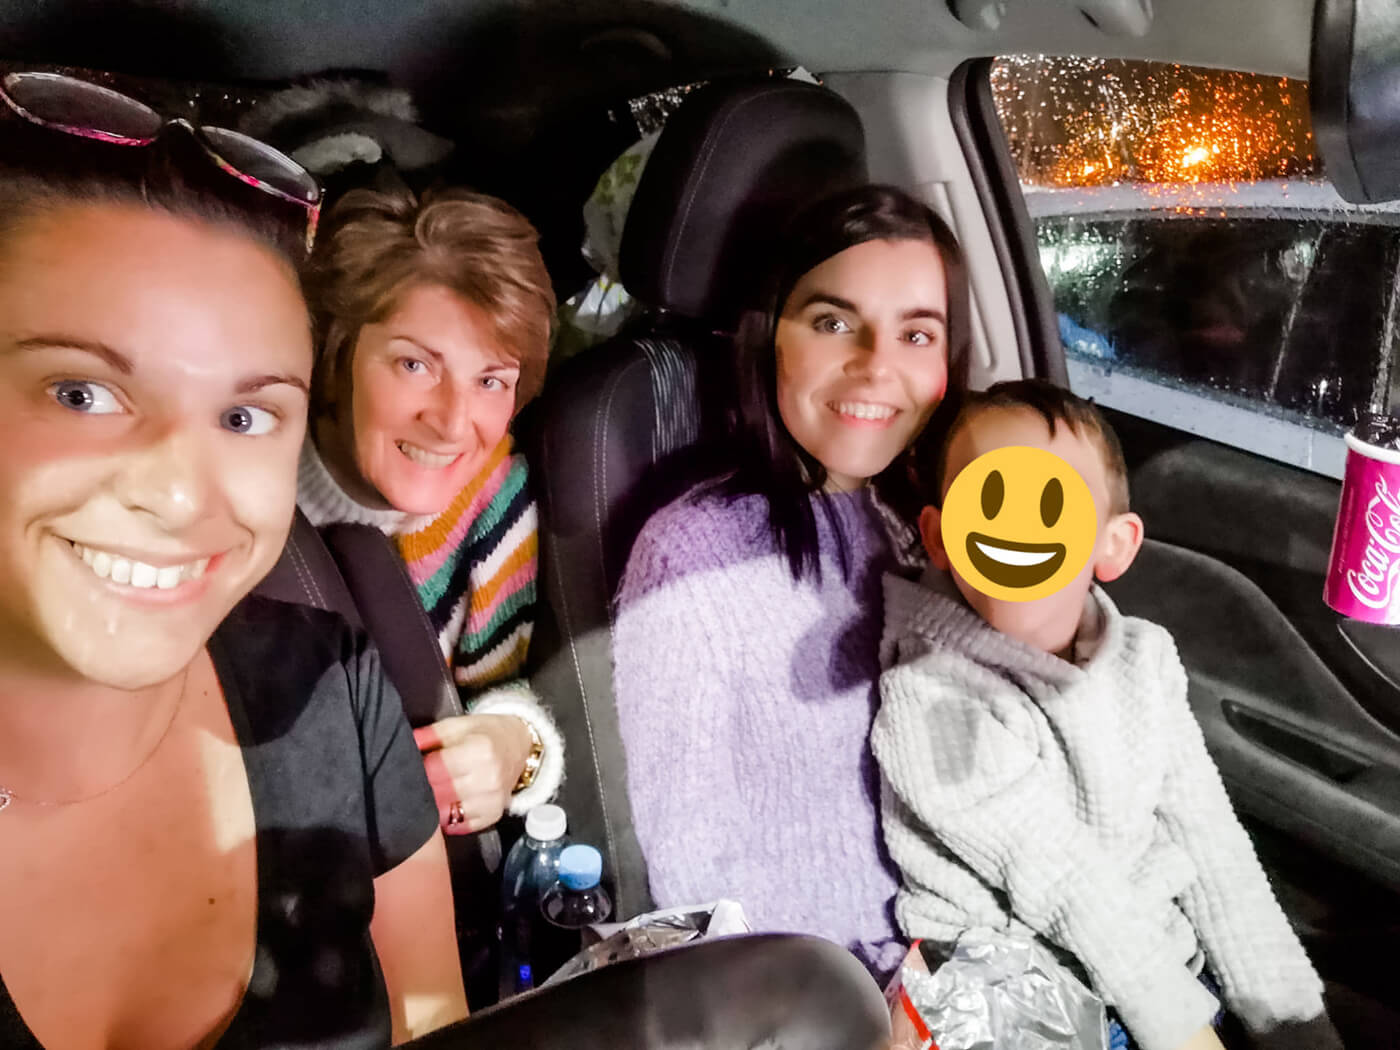 Emma sitting in the front passenger seat with her nephew on her knee. Her sister is in the drivers seat and their mum is leaning forward between them.